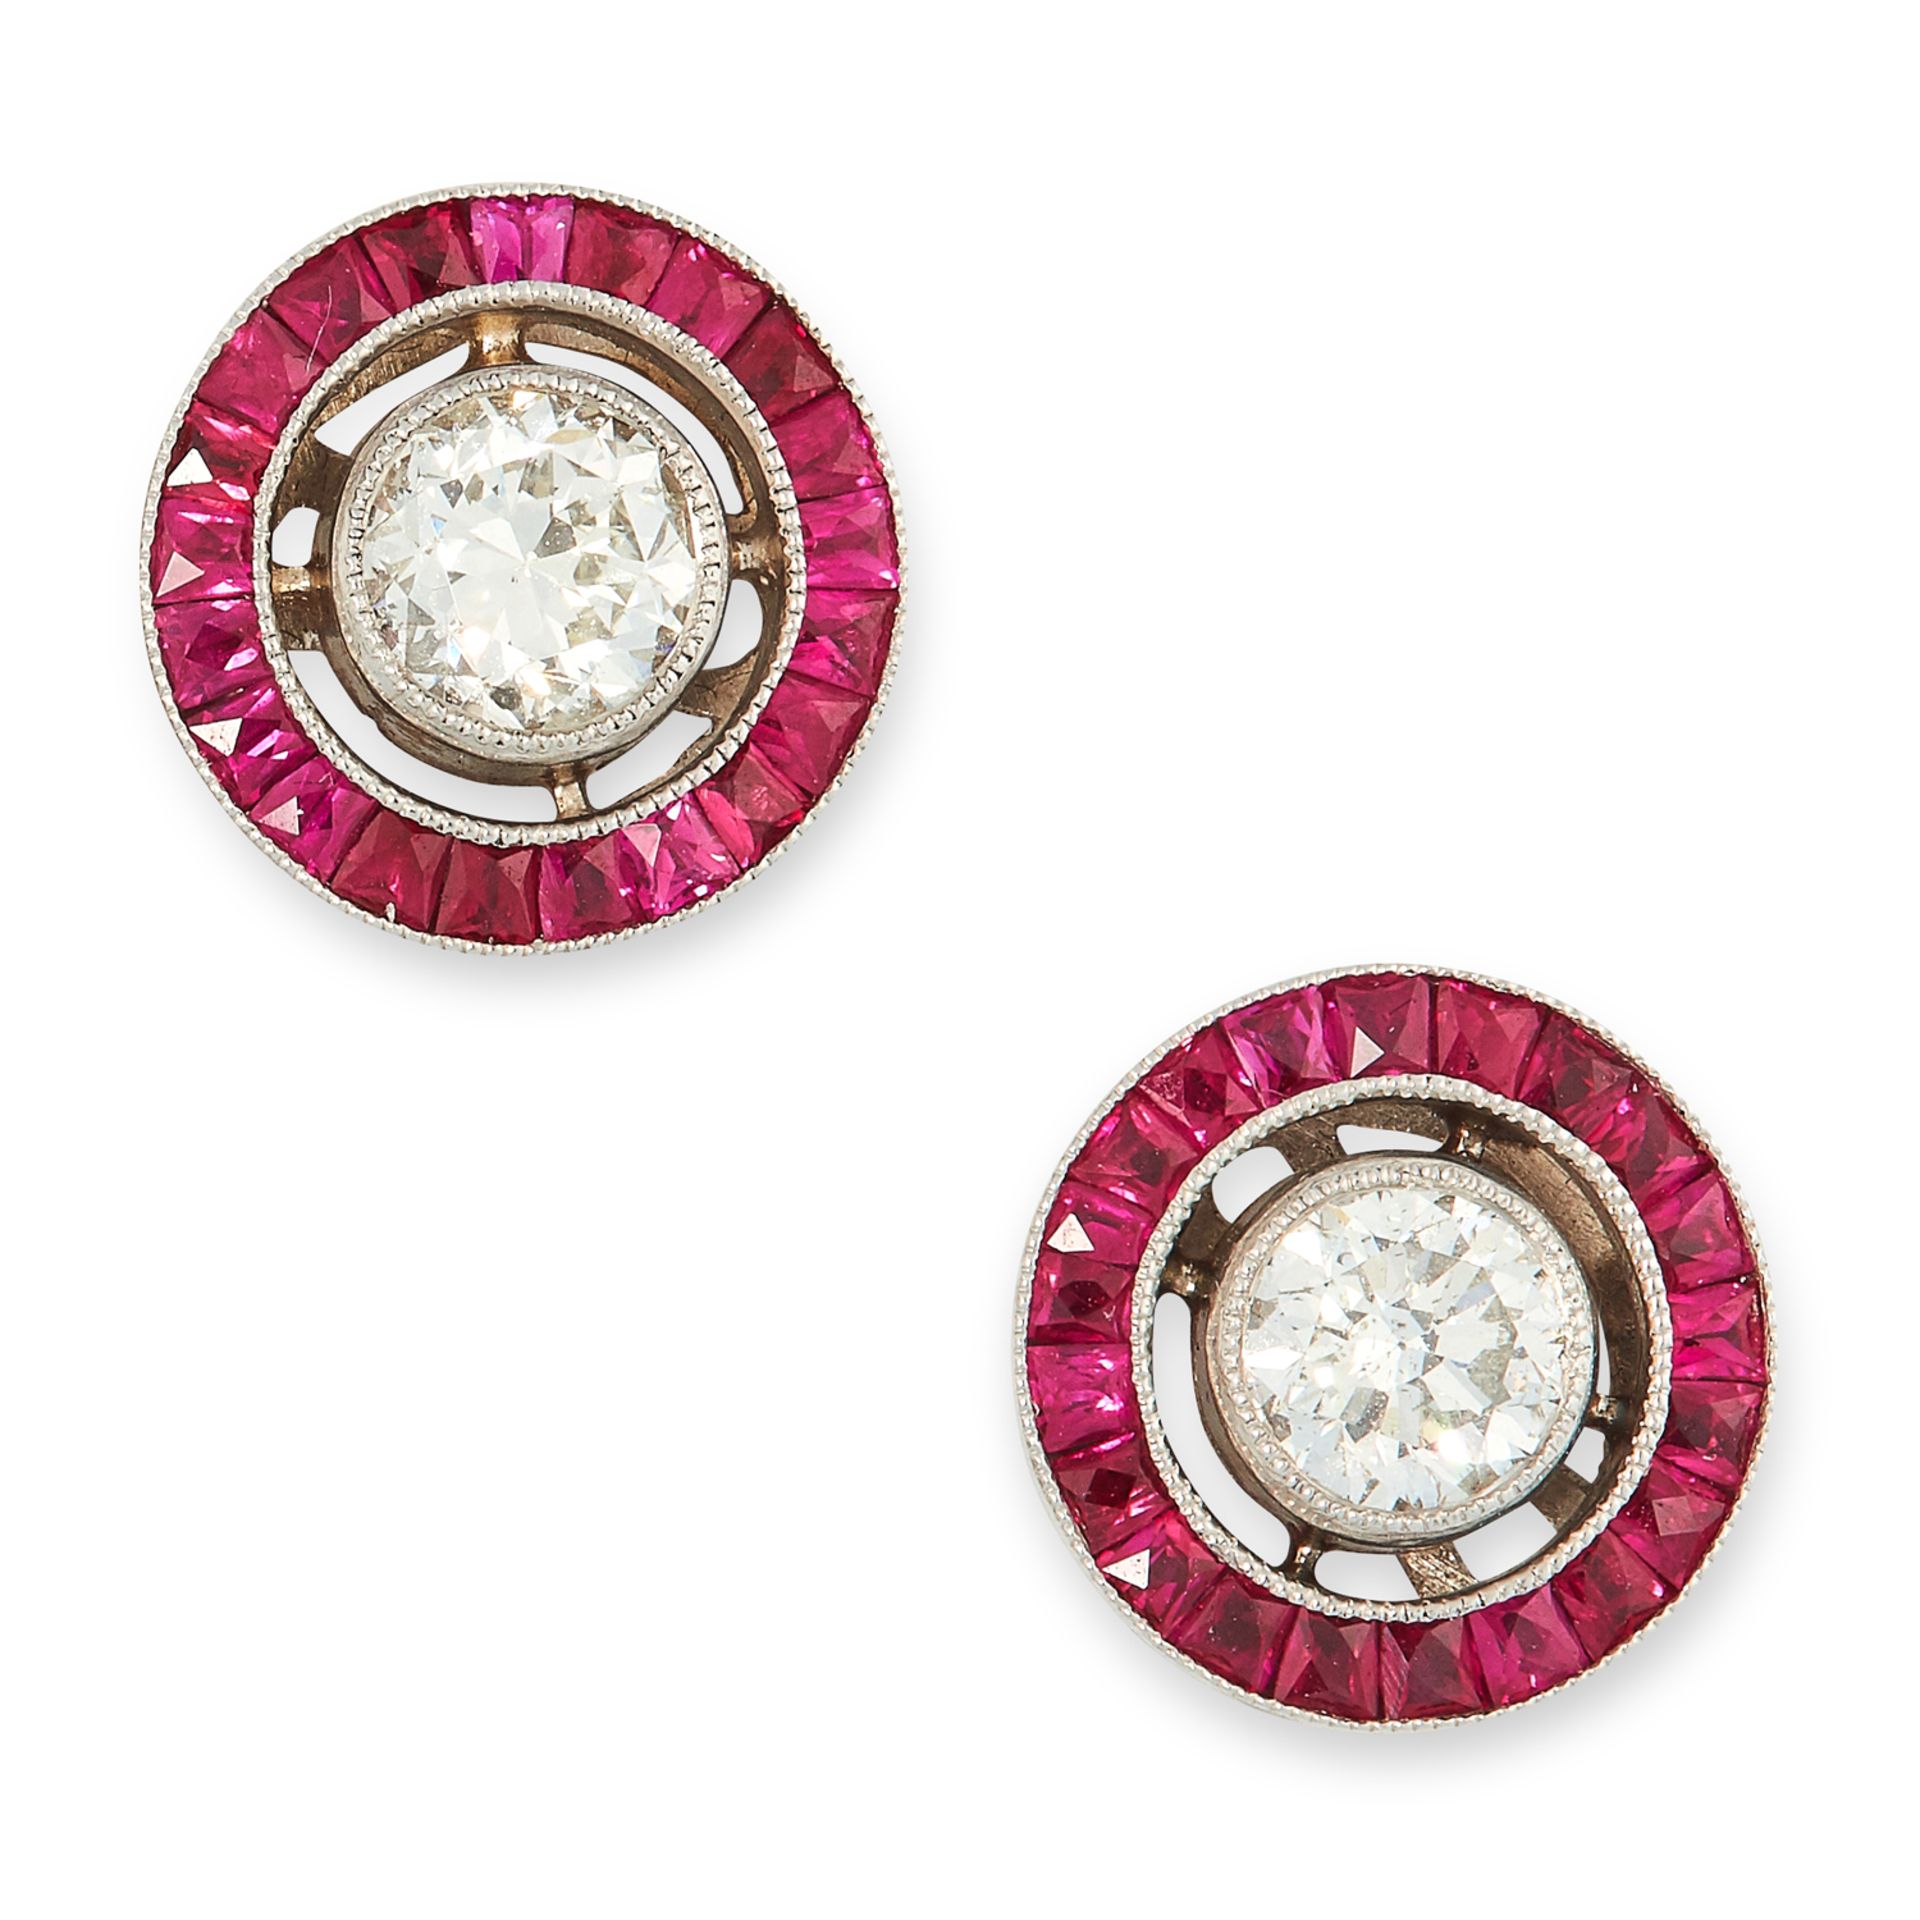 A PAIR OF DIAMOND AND RUBY TARGET EARRINGS set with round brilliant cut diamonds of approximately